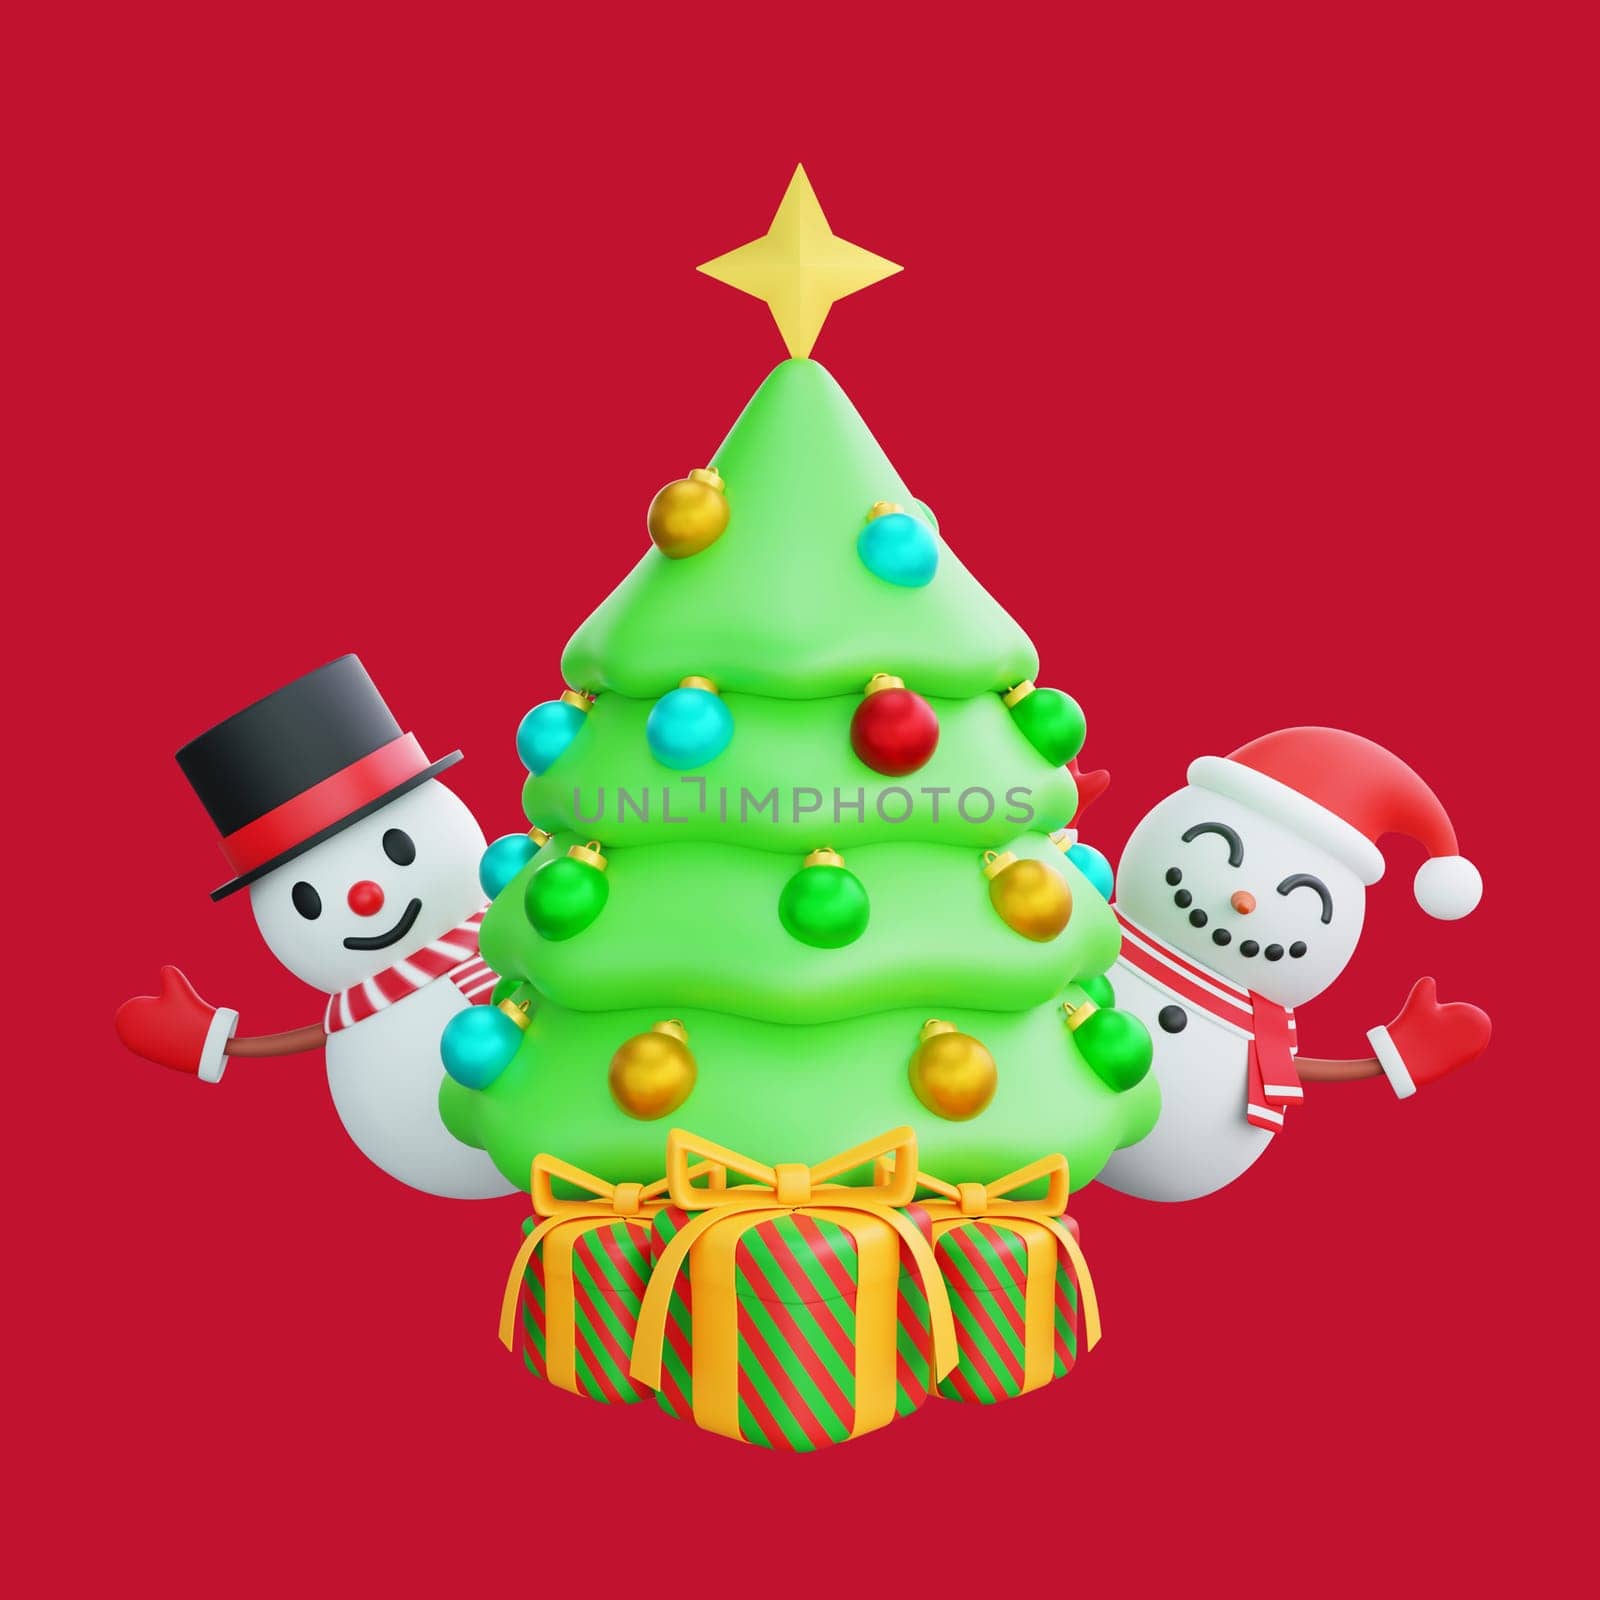 3D illustration of a decorated Christmas tree surrounded by two jolly snowman and colorful presents. Perfect for Christmas and Happy New Year celebrations